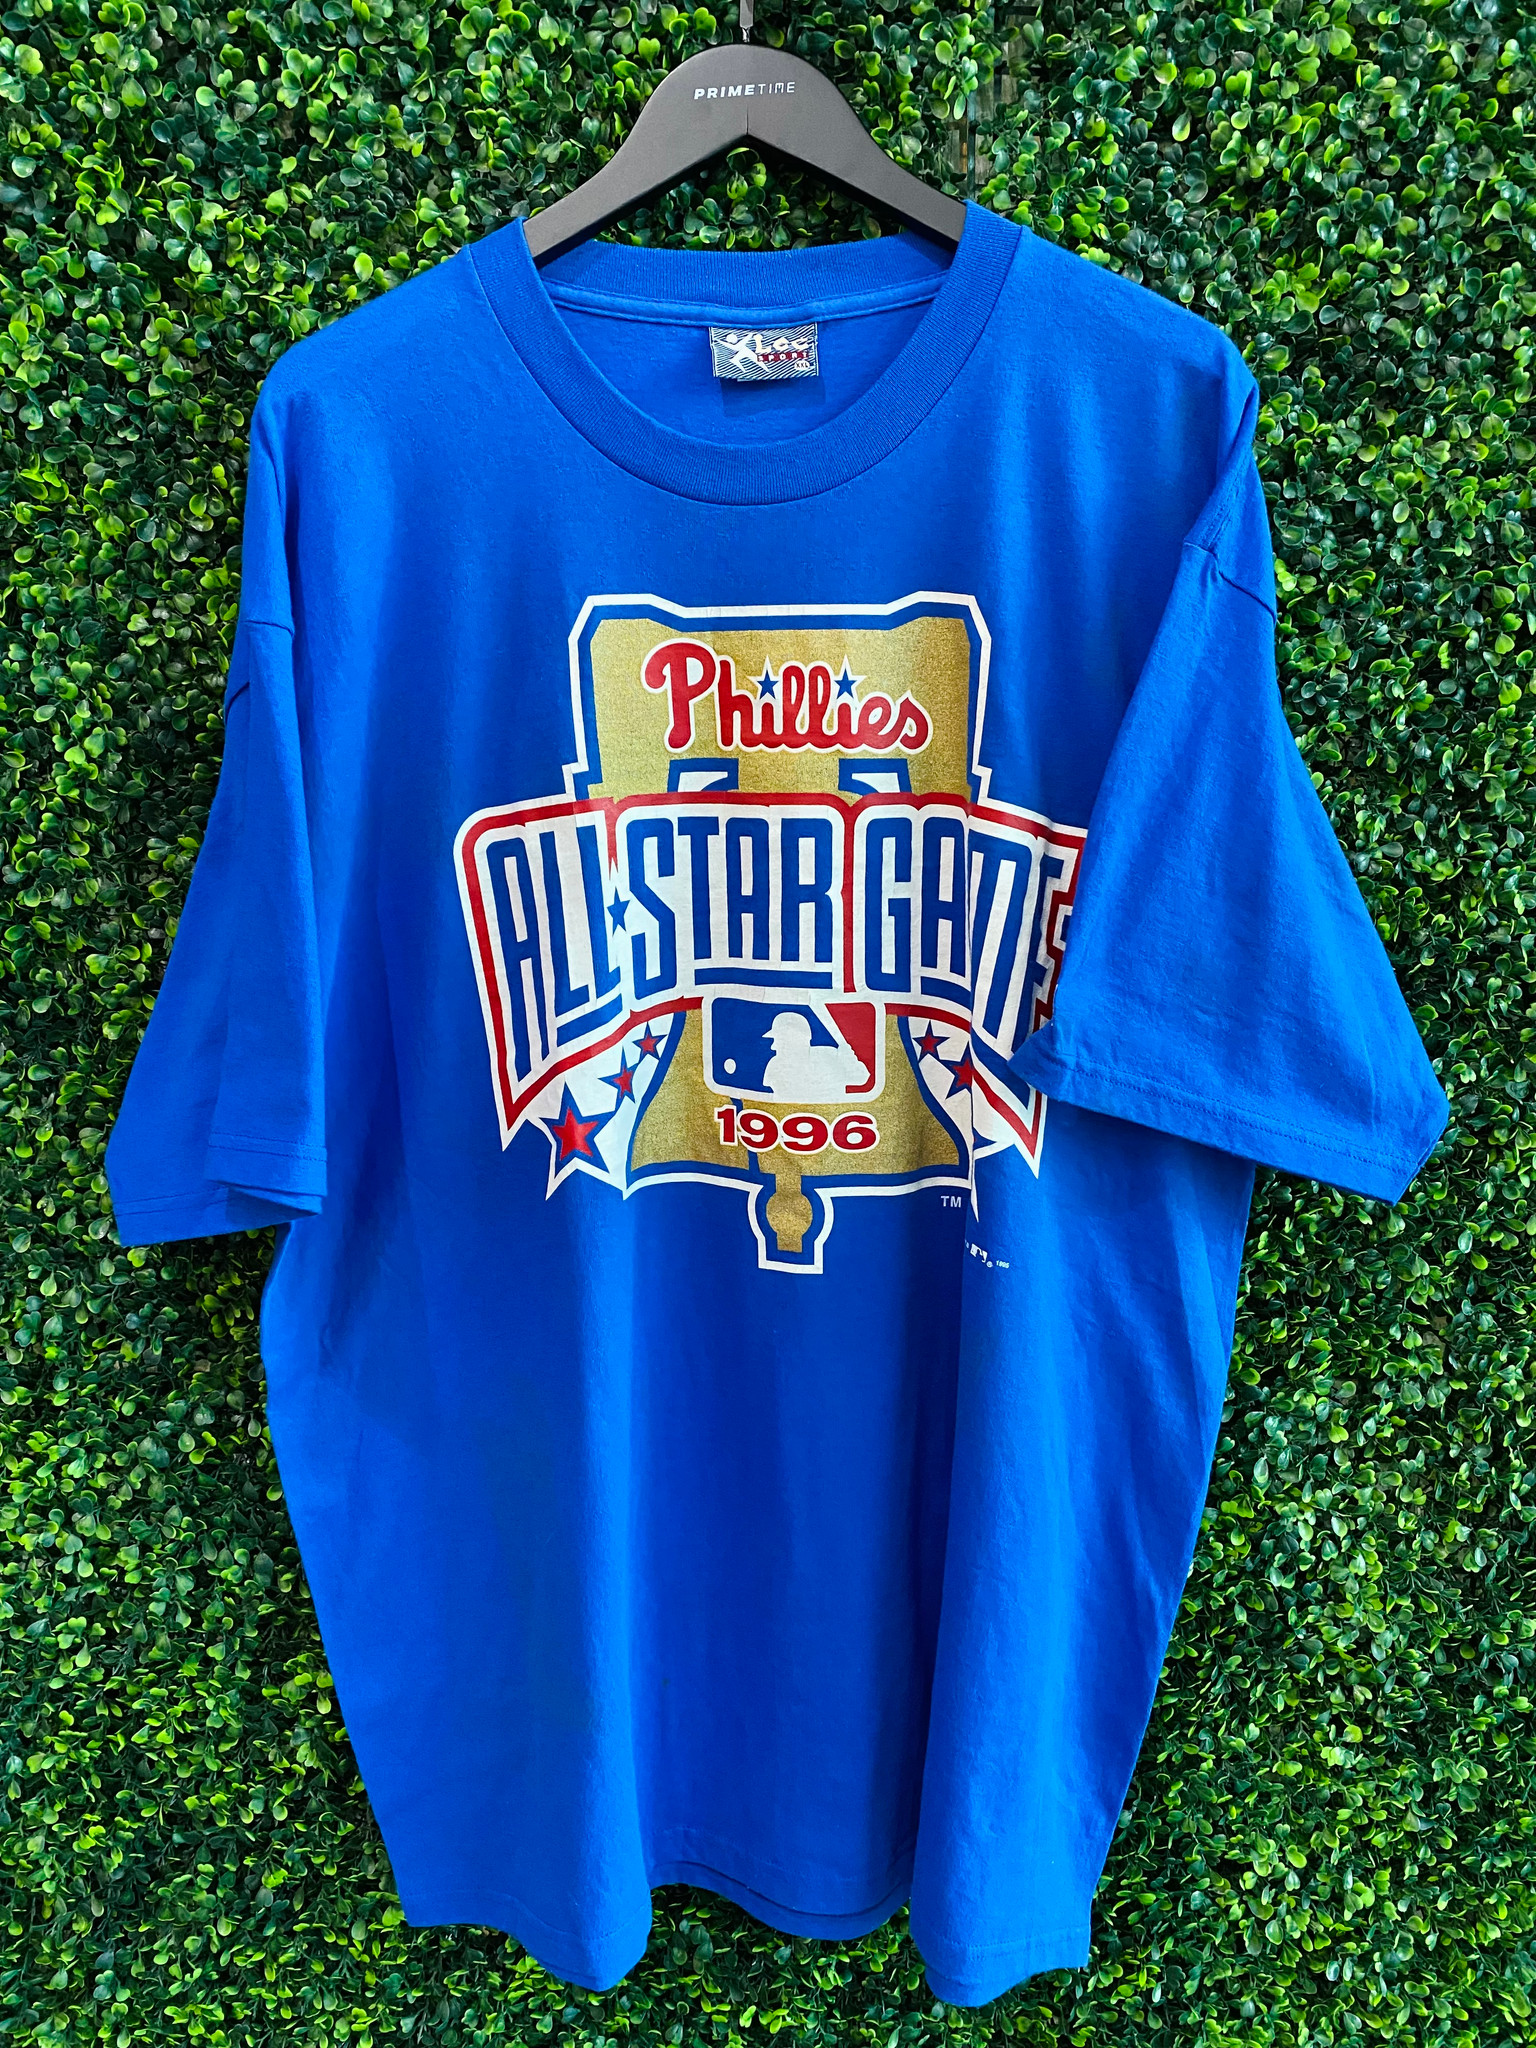 phillies all star game jersey